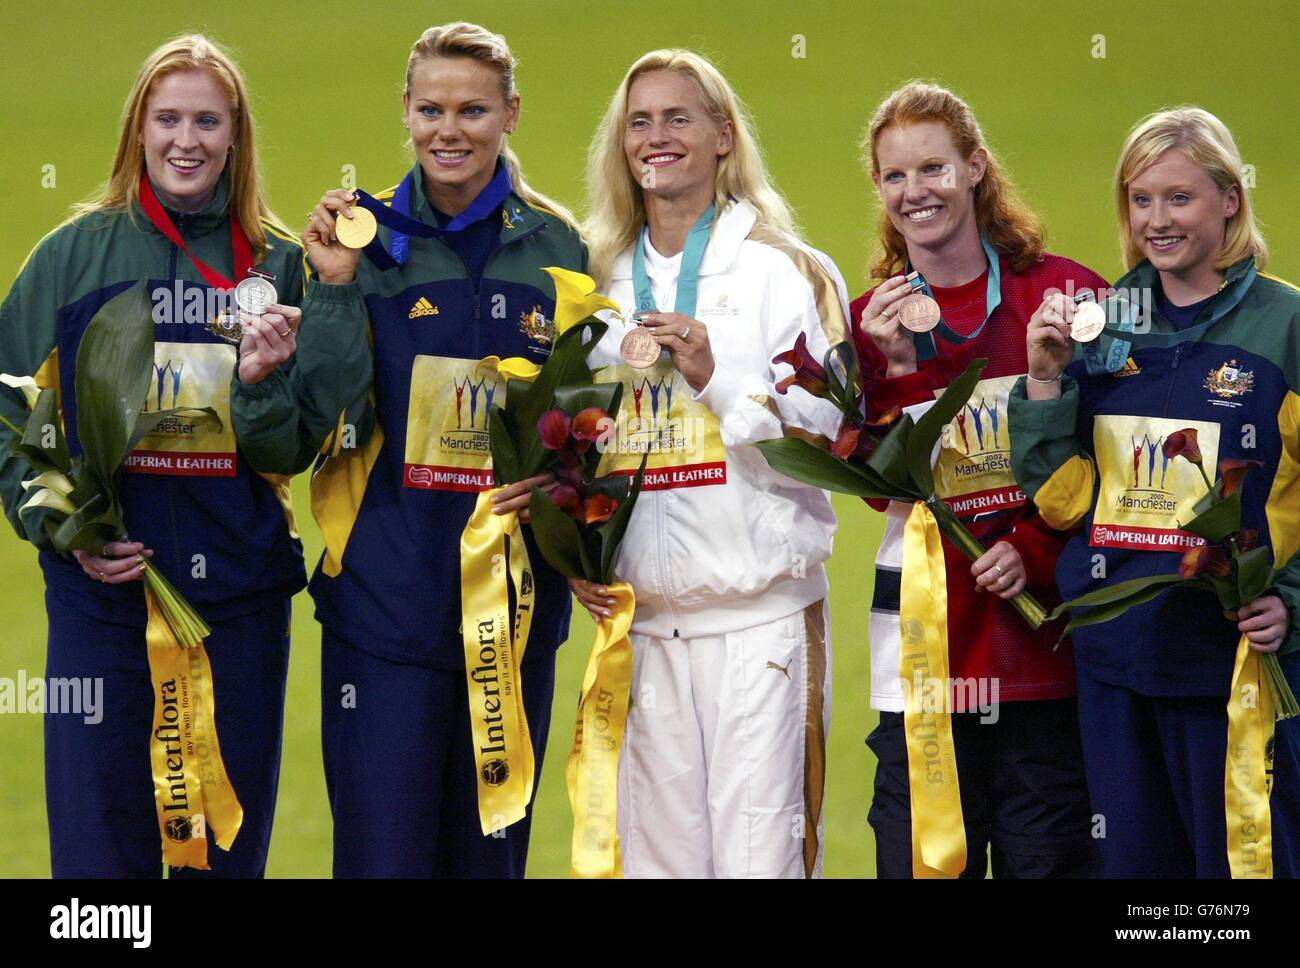 Australia's Tatiana Grigorieva (2L) celebrates her gold medal victory in the women's pole vault final with compatriot Kym Howe (L) who took silver and joint bronze medal winners England's Irie Hill (C). *......, Australia's Bridgid Isworth (R) and Canada's Stephanie McCann (2R) at the 2002 Commonwealth Games in Manchester. Stock Photo